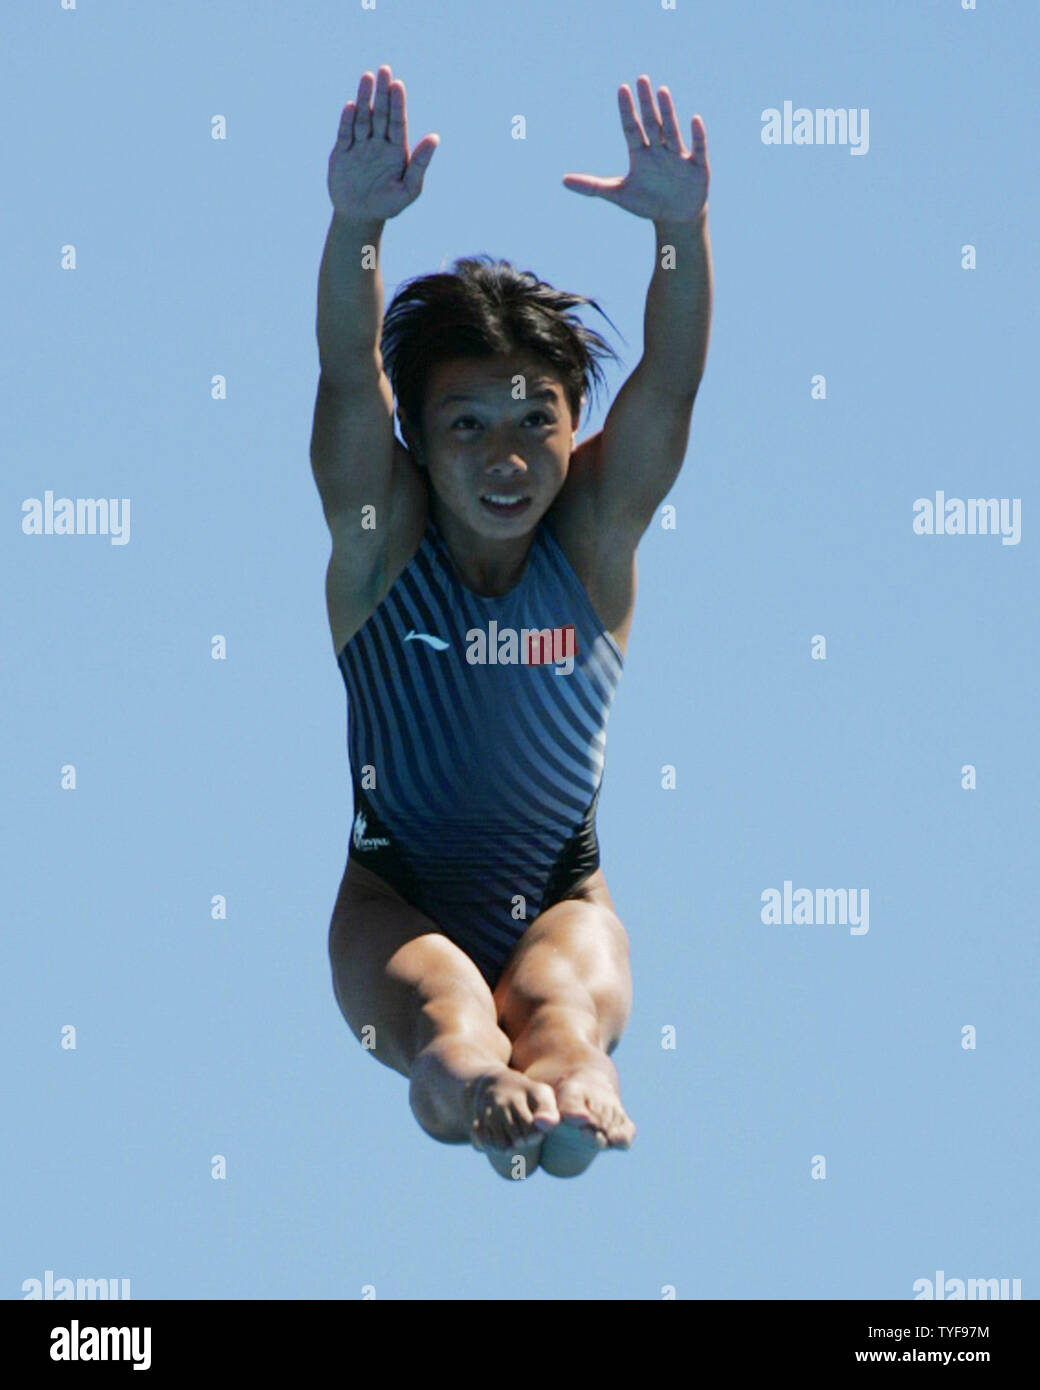 Chinese diver Tong Jia performs her fourth semi-final dive from the 10-meter tower at the XI FINA World Championships in Montreal, Canada on July 20, 2005.  Miss Jia, who already won a gold at these championships in synchronized platform diving, stand in third place behind American Laura Wilkinson and Canadian Emilie Heymans entering the finals. (UPI Photo / Grace Chiu) Stock Photo